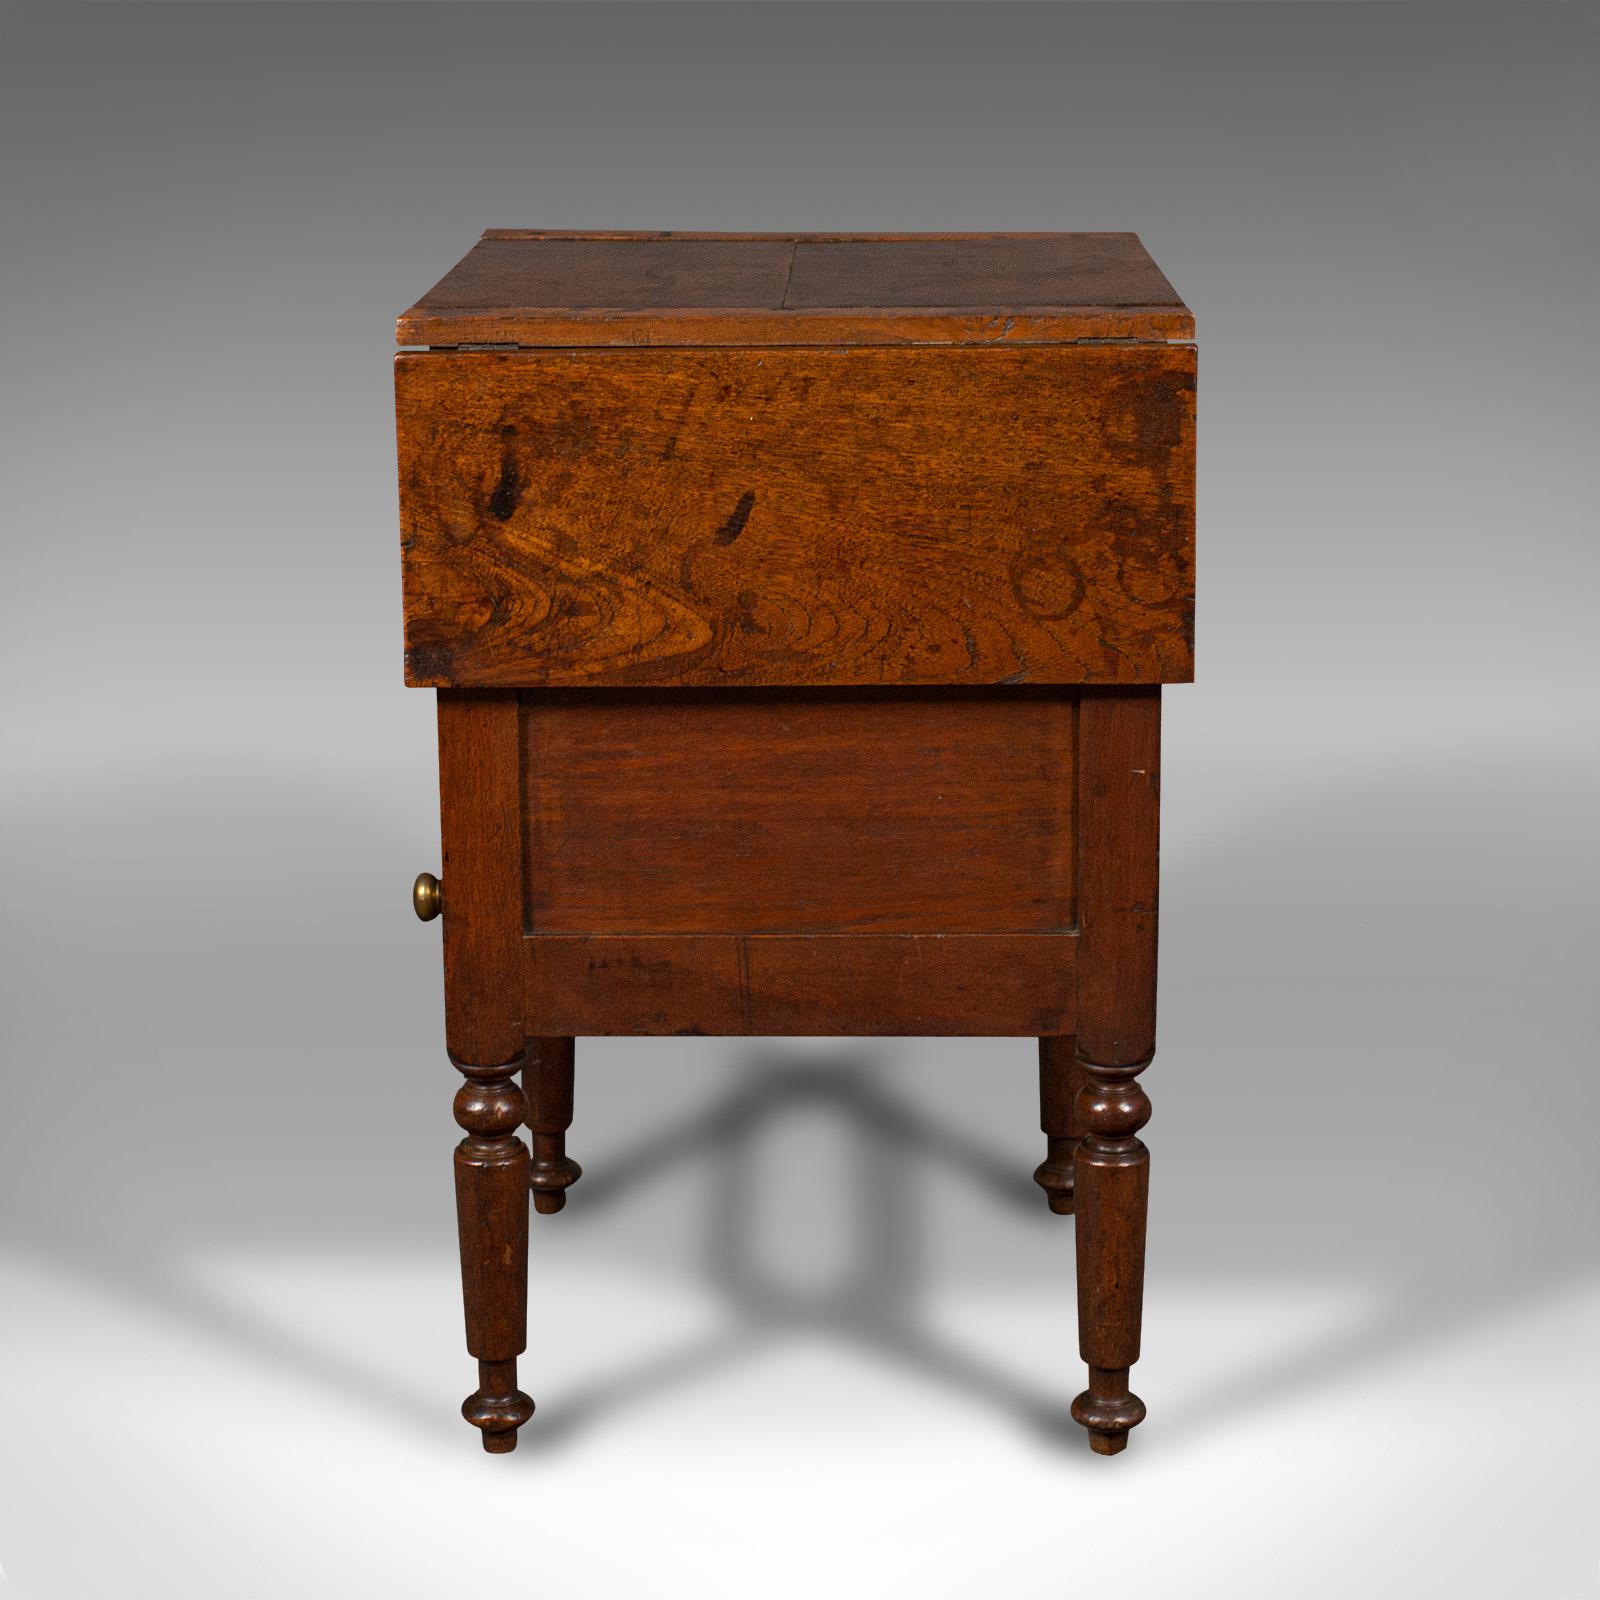 19th Century Antique Ship's Wash Stand, English, Drop Flap Nightstand, Victorian, Circa 1850 For Sale